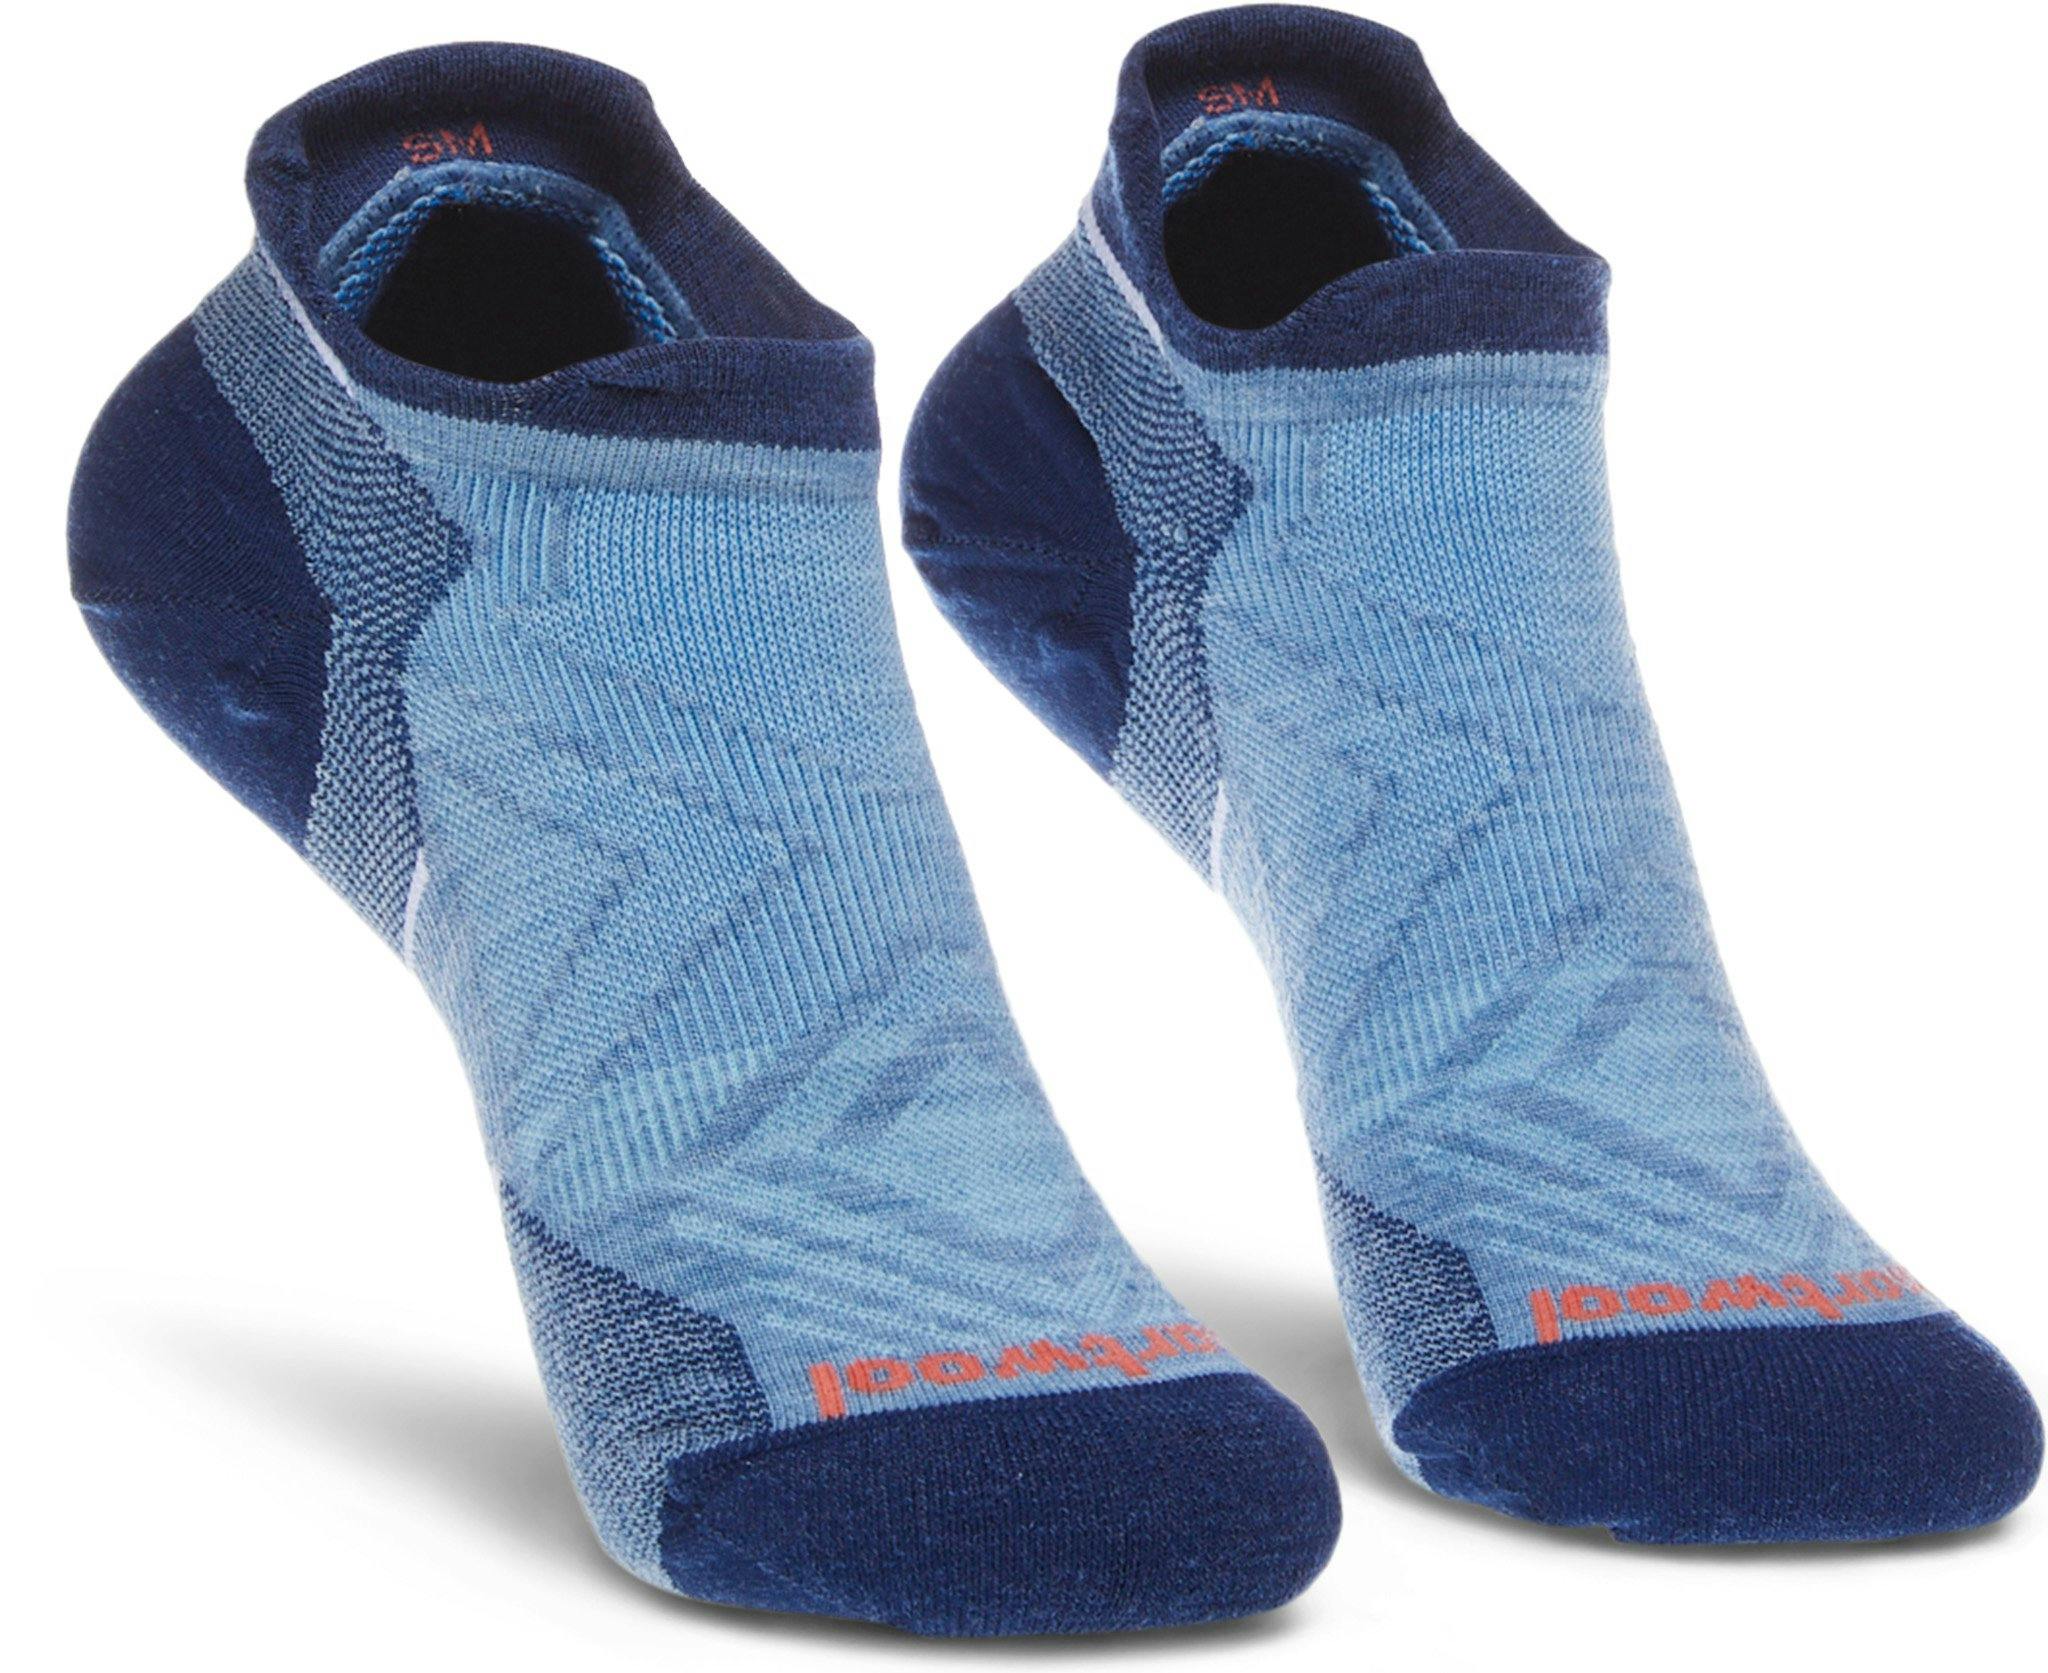 Product image for Run Zero Cushion Low Ankle Socks - Women's